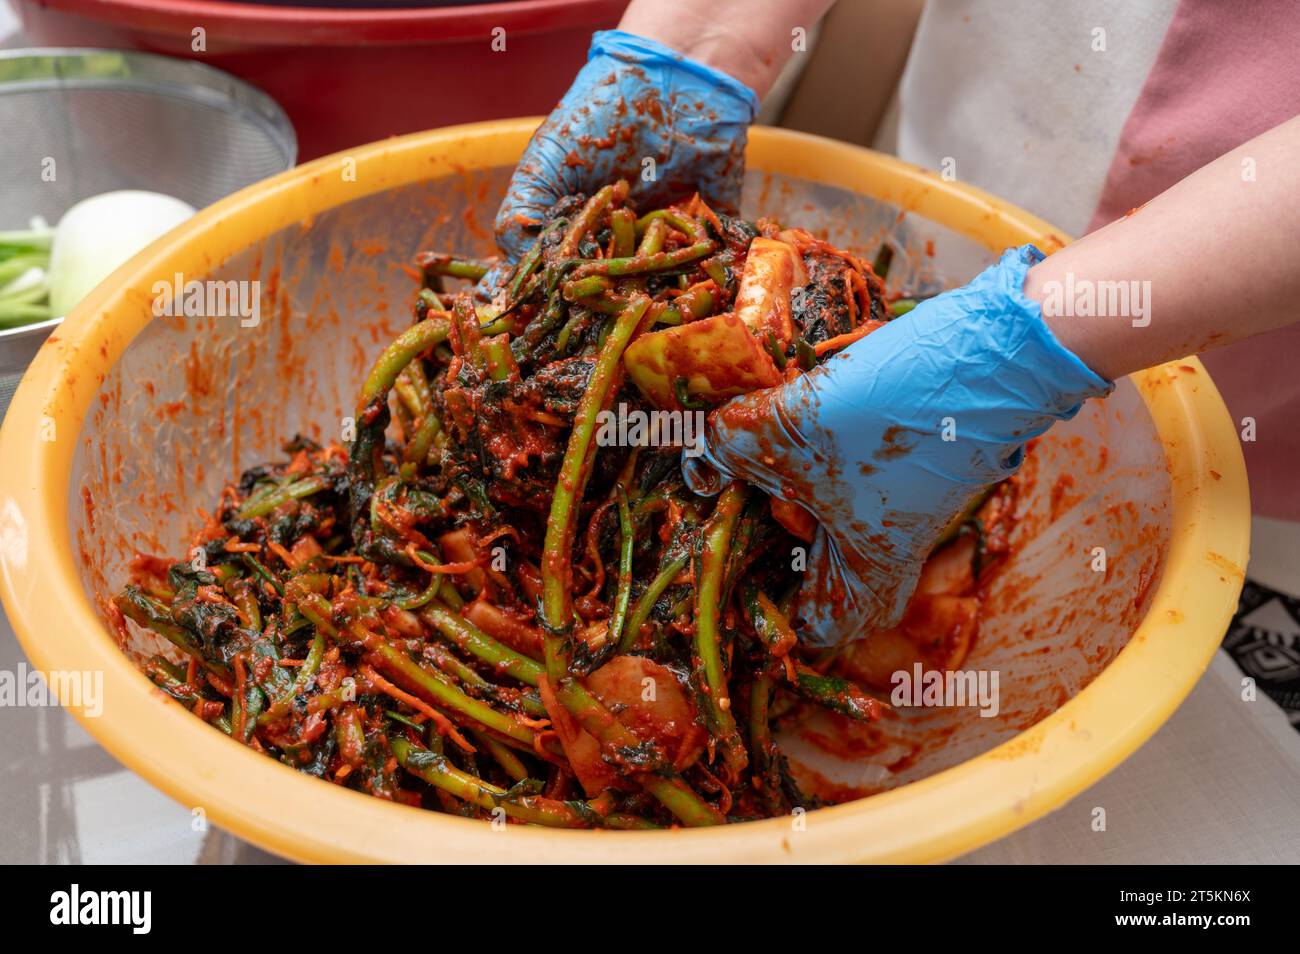 The process of making a traditional Korean dish, kimchi. A woman wearing gloves is preparing various ingredients needed for the kimchi. Stock Photo